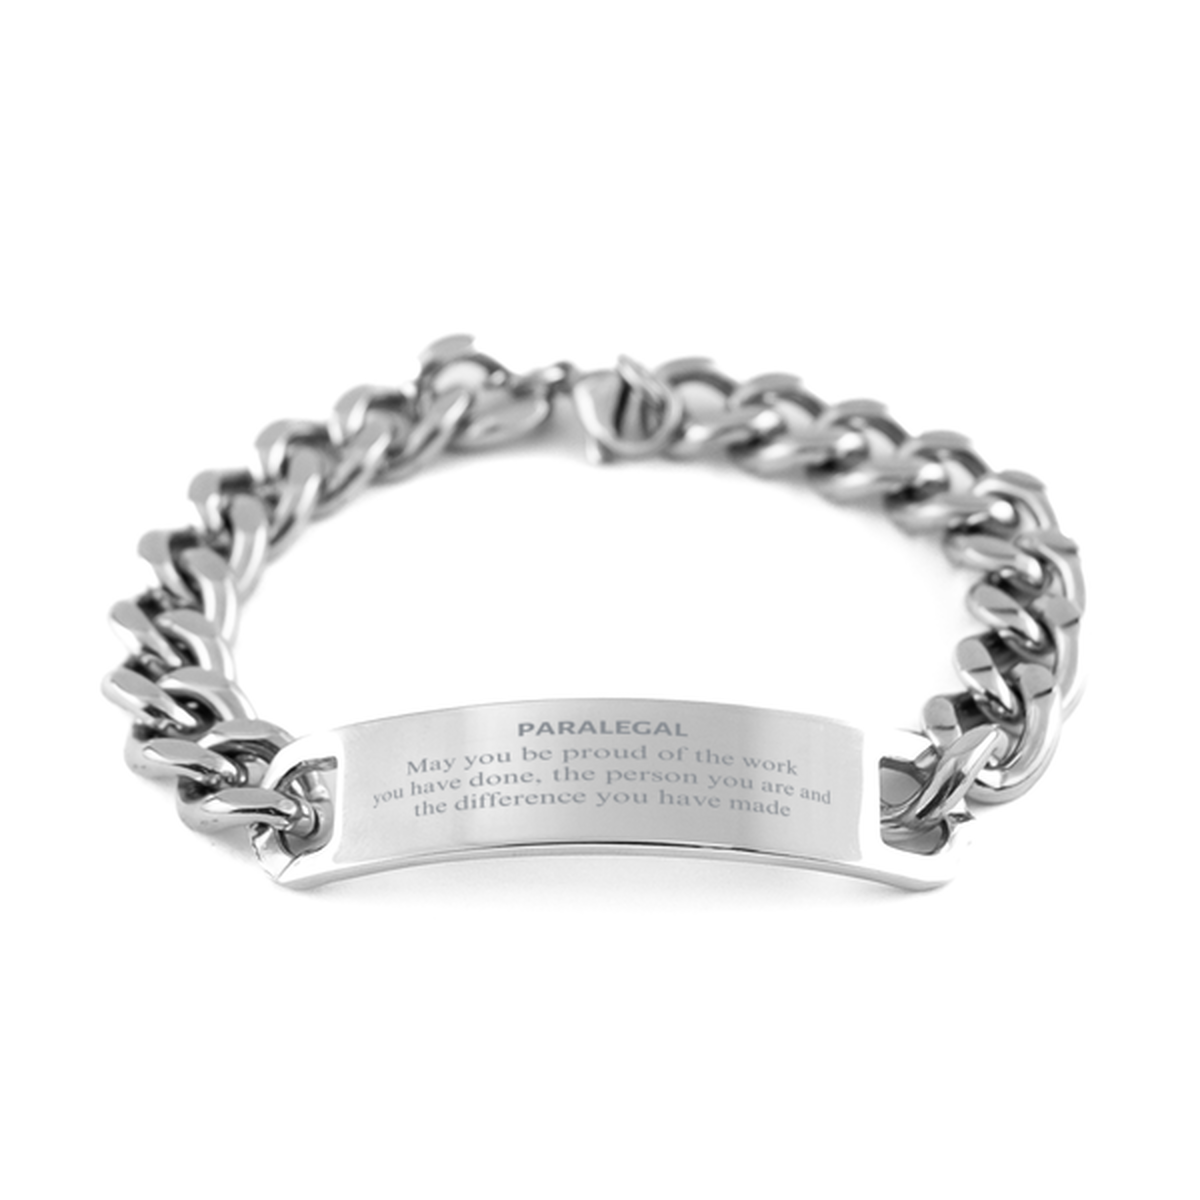 Paralegal May you be proud of the work you have done, Retirement Paralegal Cuban Chain Stainless Steel Bracelet for Colleague Appreciation Gifts Amazing for Paralegal